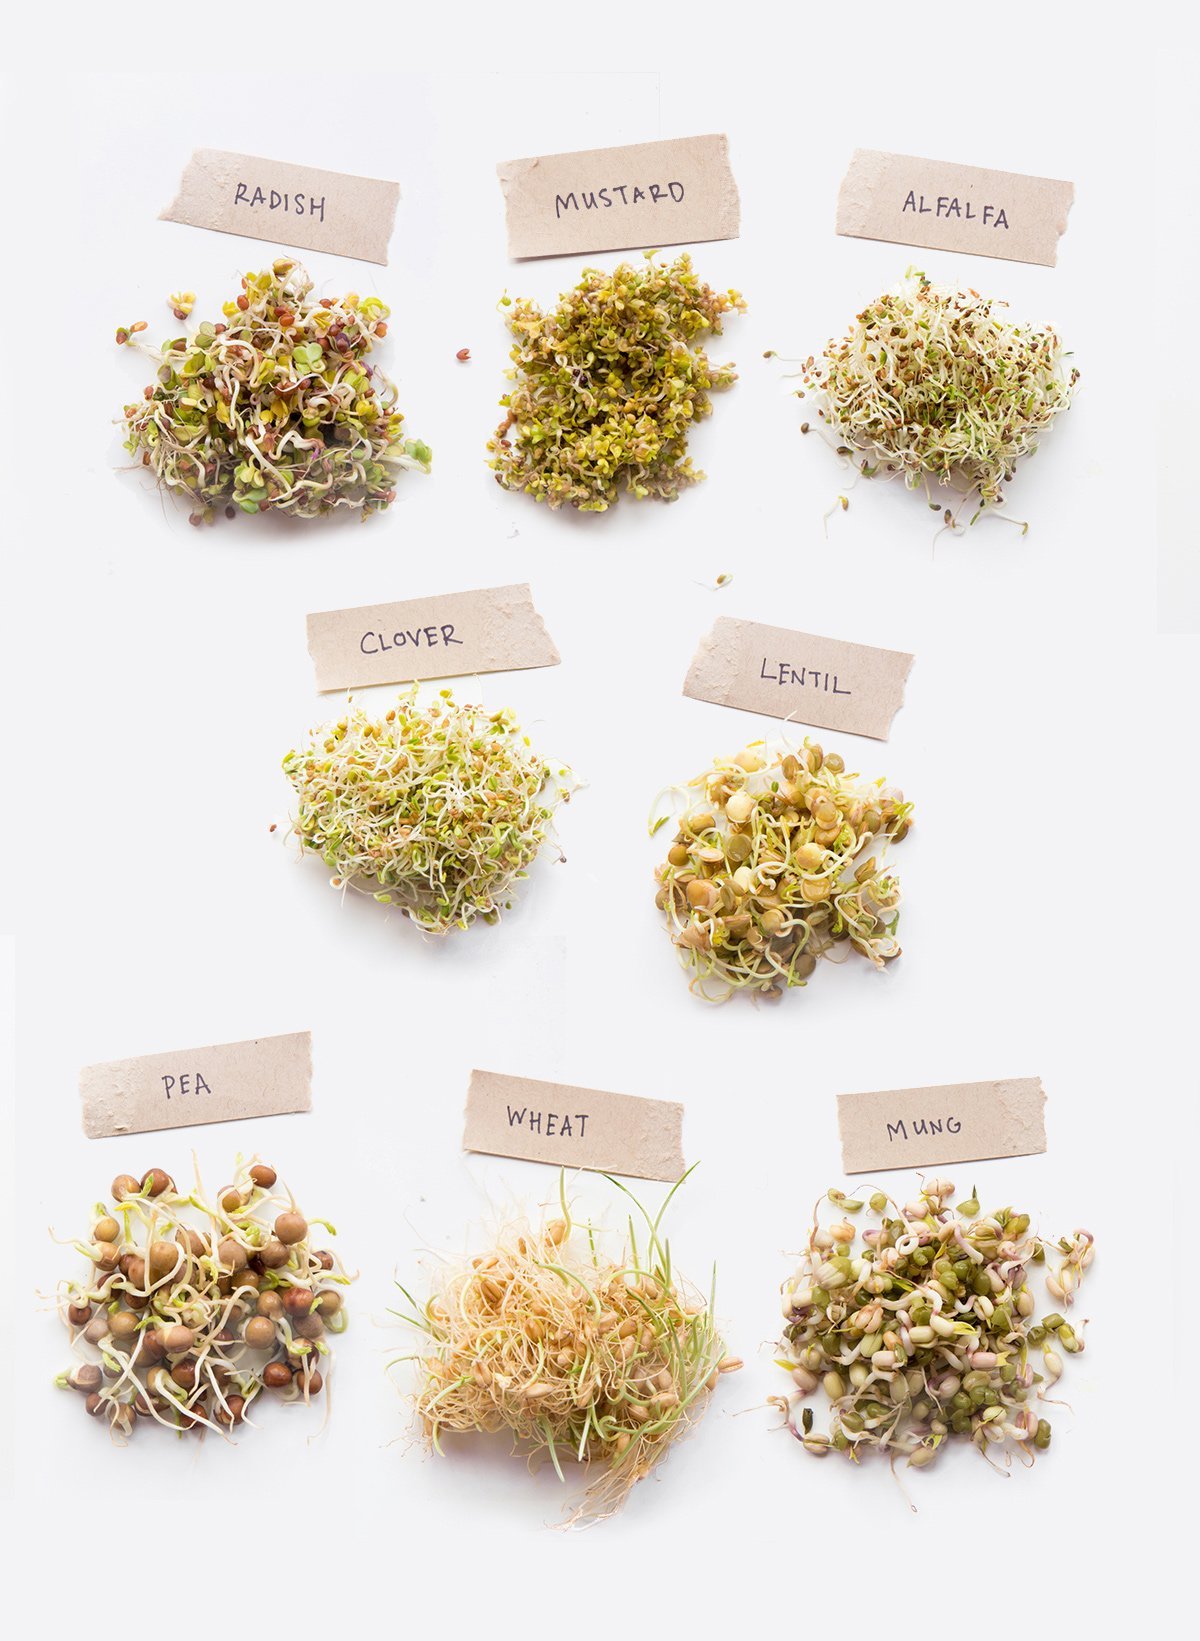 Individual piles of sprouts labeled with the type of seed - radish, mustard, alfalfa, clover, lentil, pea, wheat, mung bean